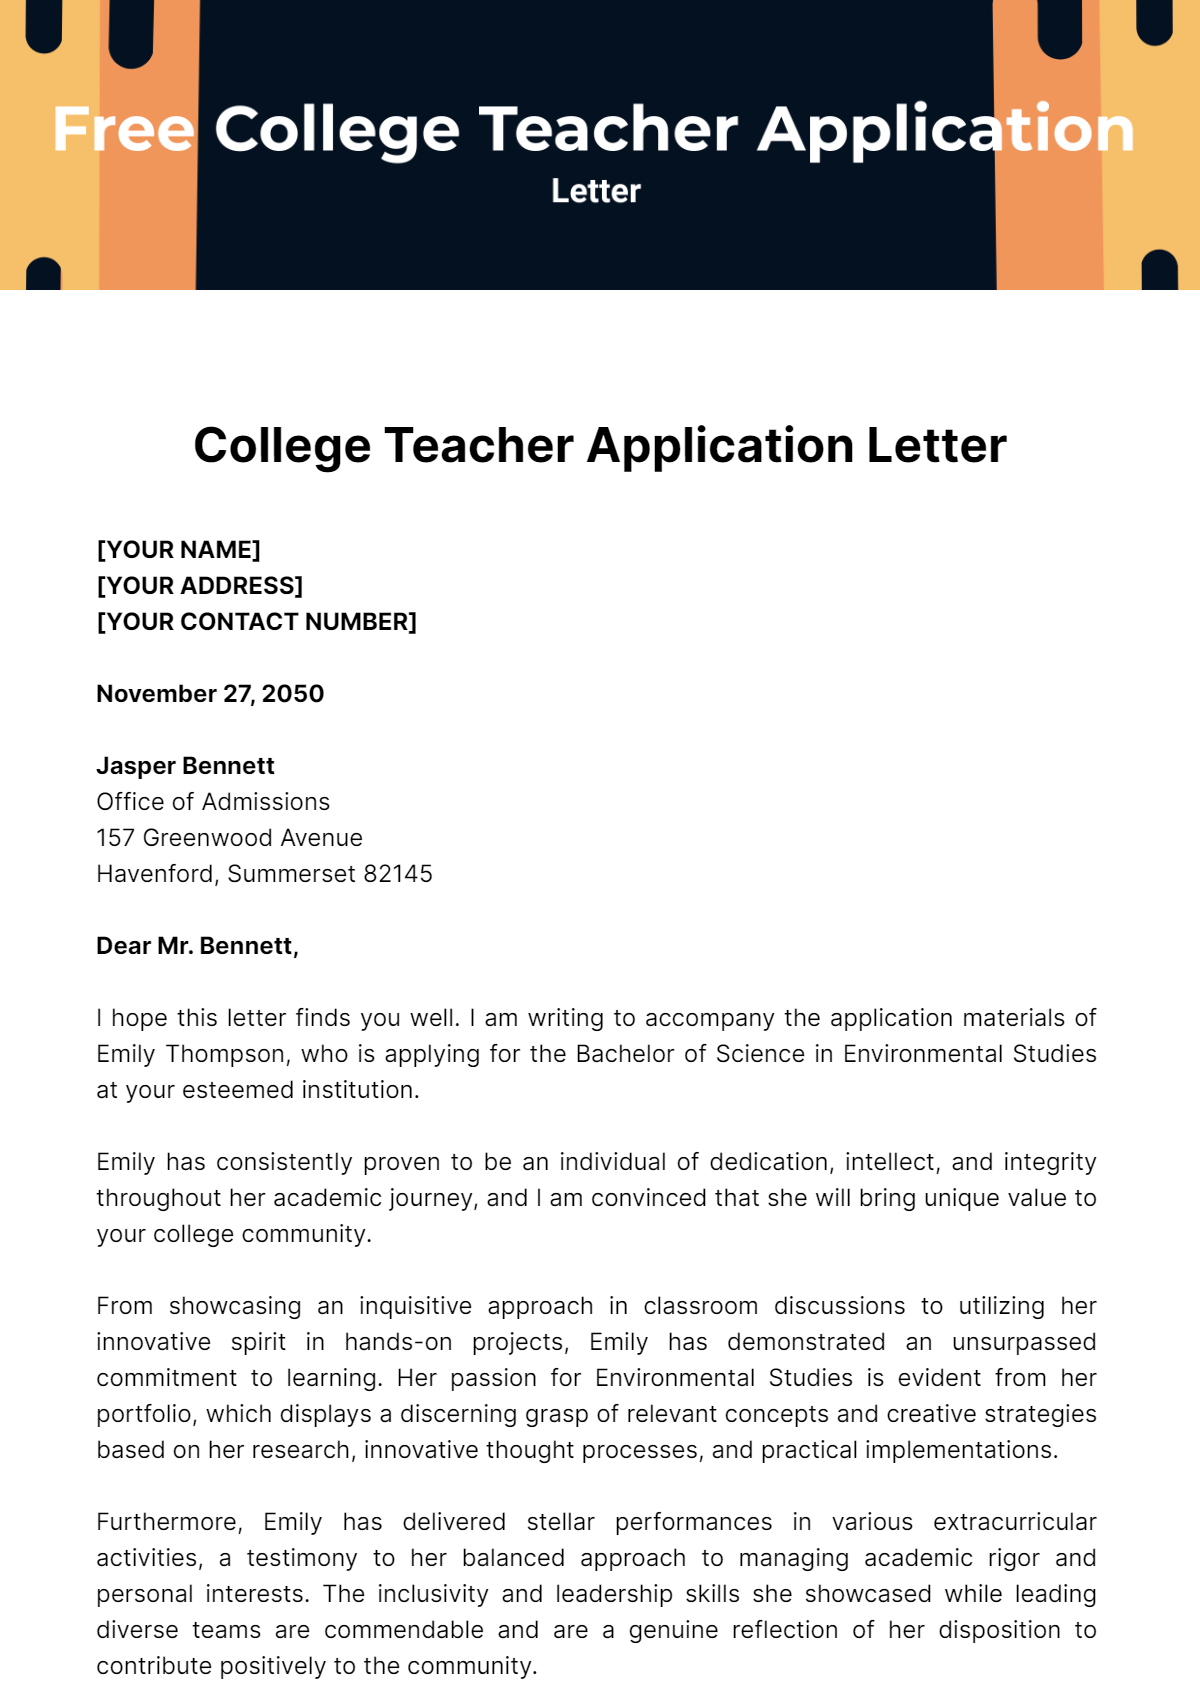 Free College Teacher Application Letter Template